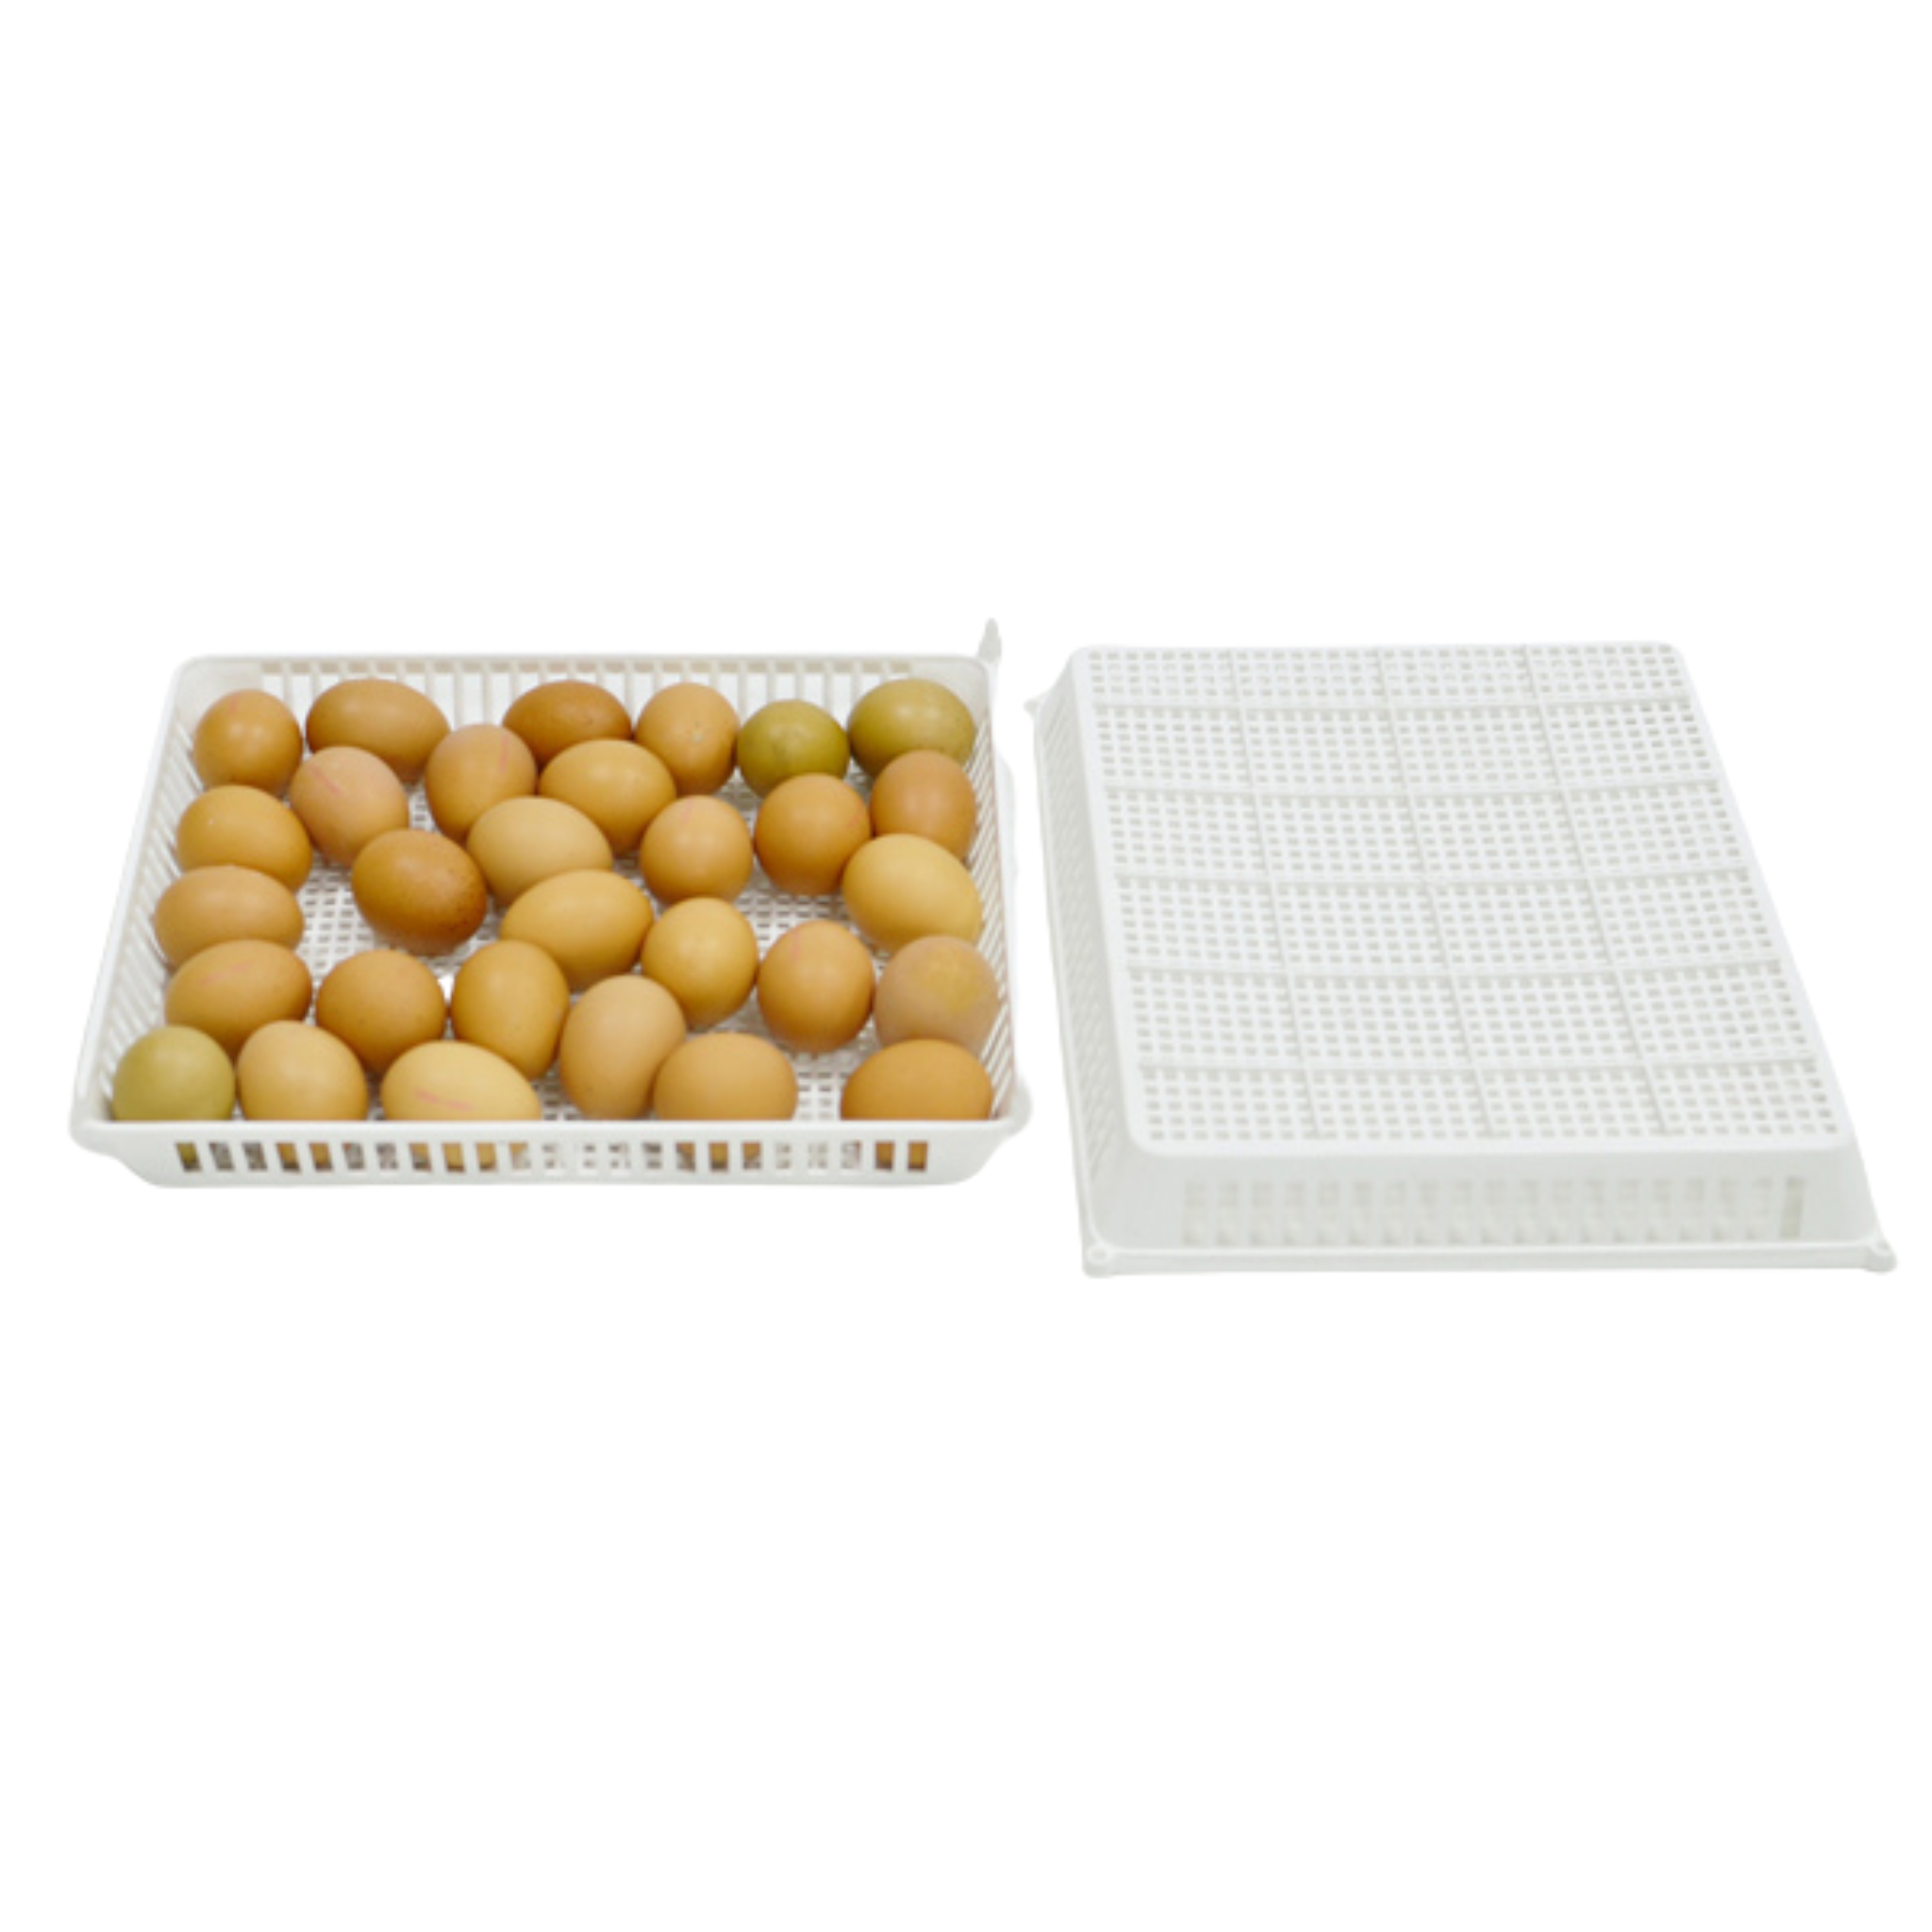 Hatching Time Cimuka. Egg basket shown with 30 brown chicken eggs inside to show capacity.